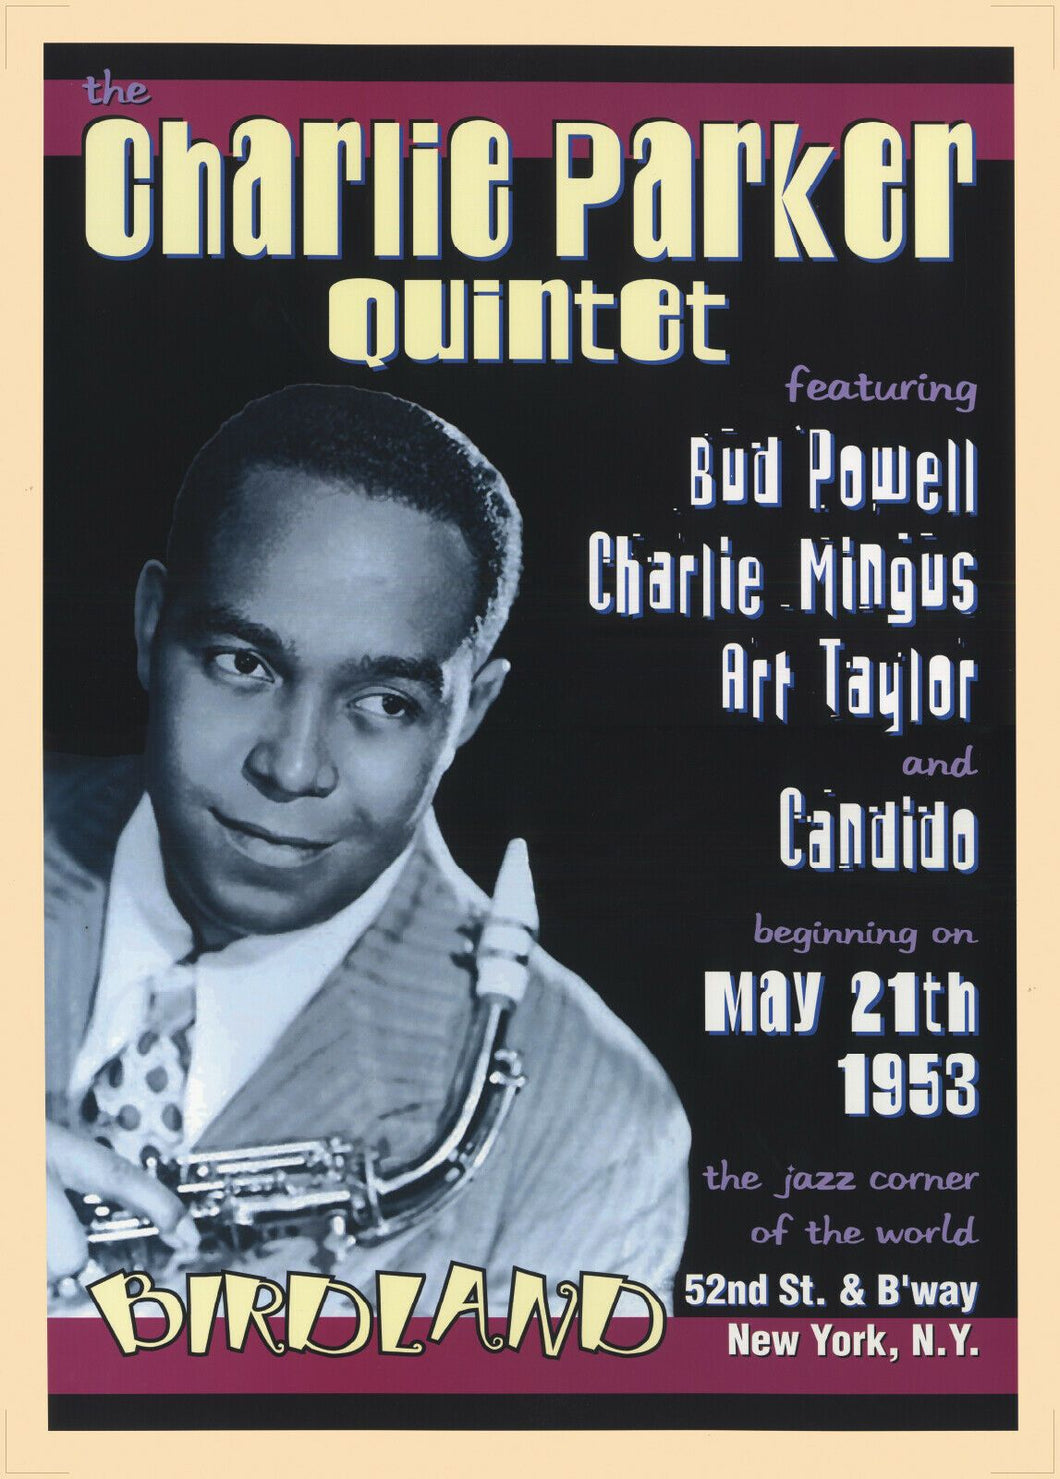 CHARLIE PARKER CONCERT PROMO POSTER - LIVE NEW YORK CITY 1953 USA A2 size - Original Music and Movie Posters for sale from Bamalama - Online Poster Store UK London